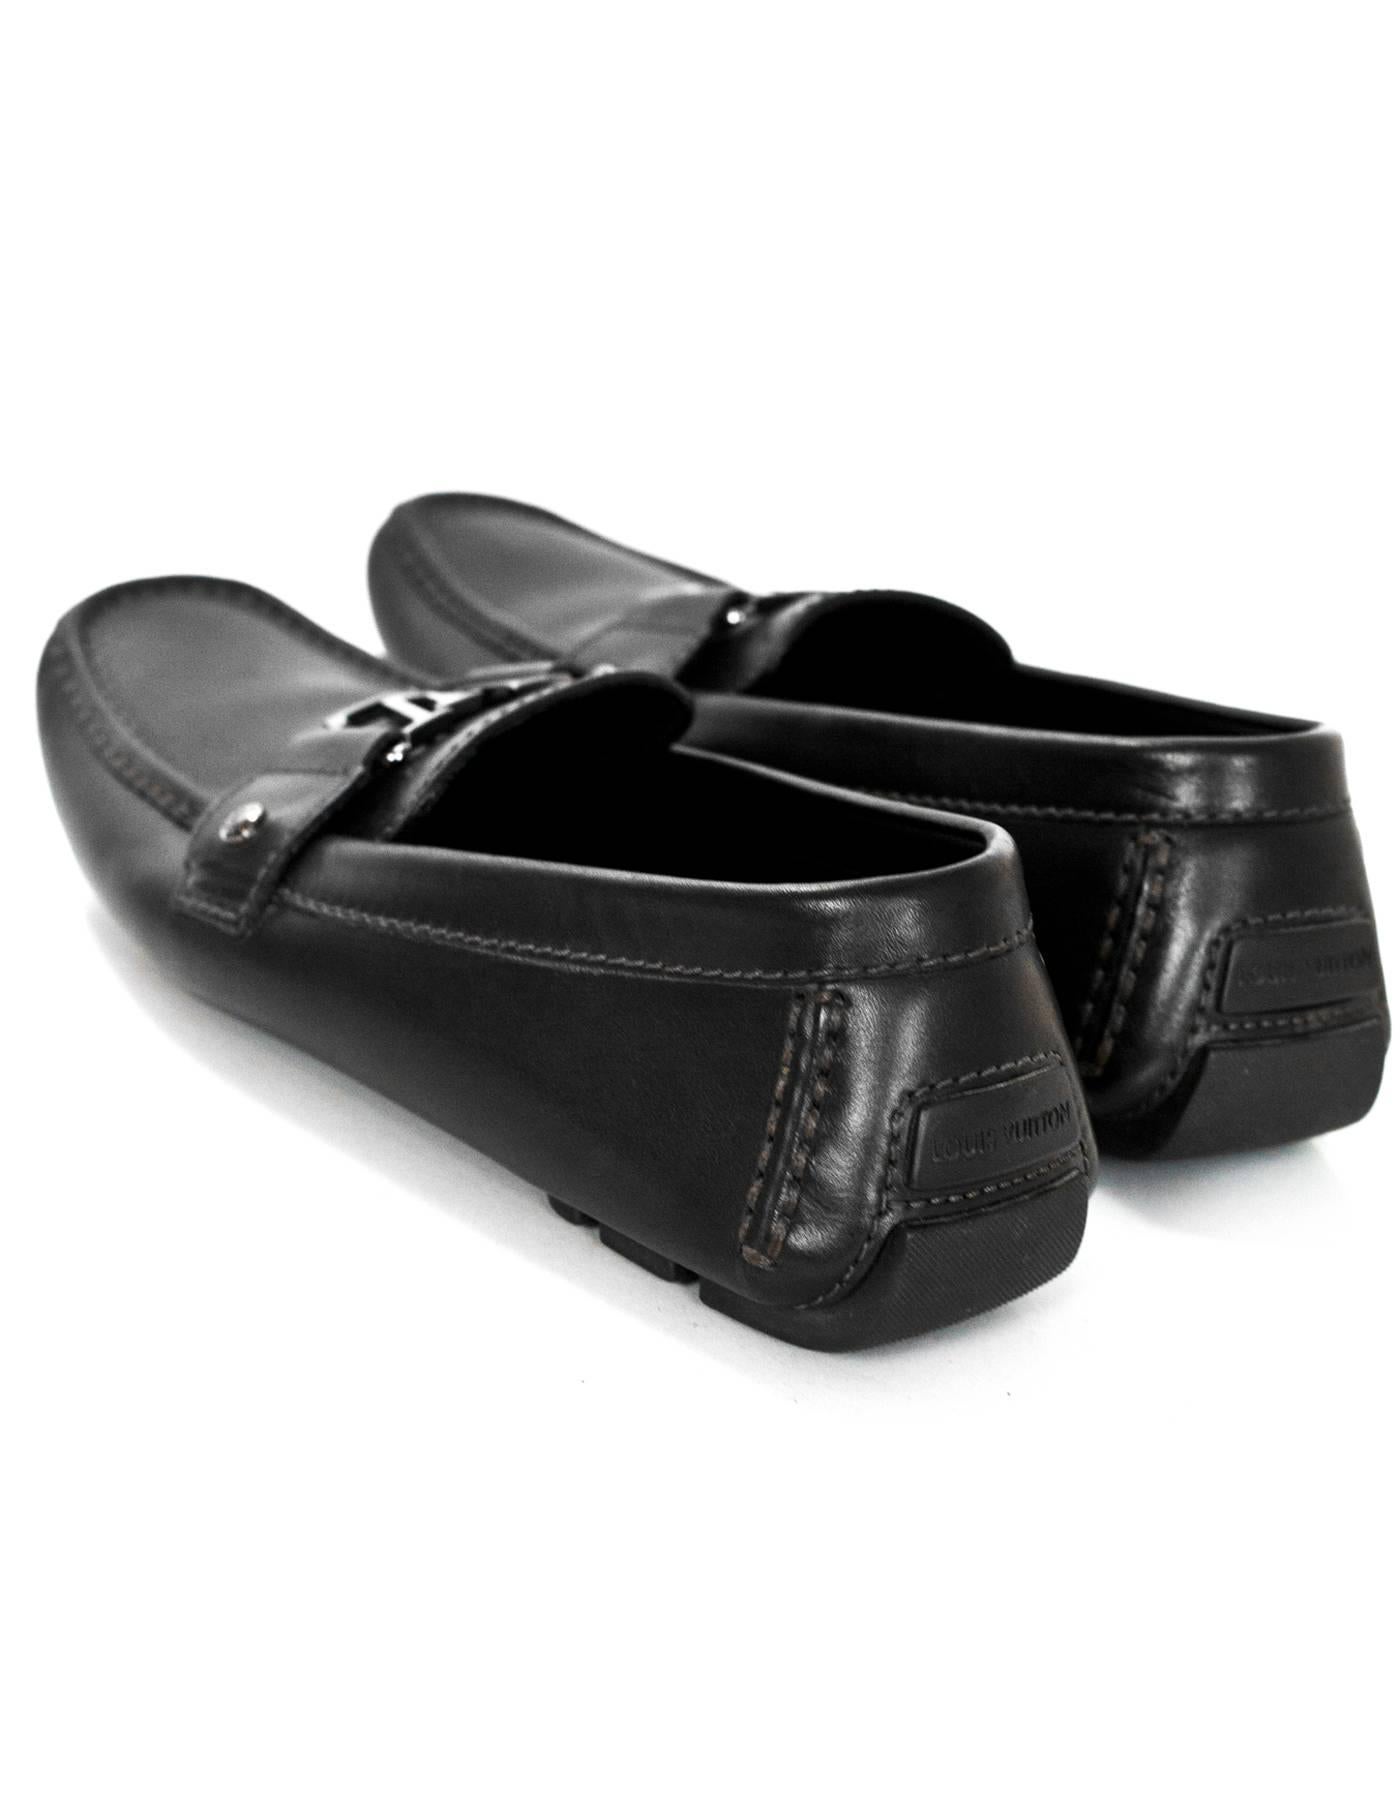 mens lv loafers